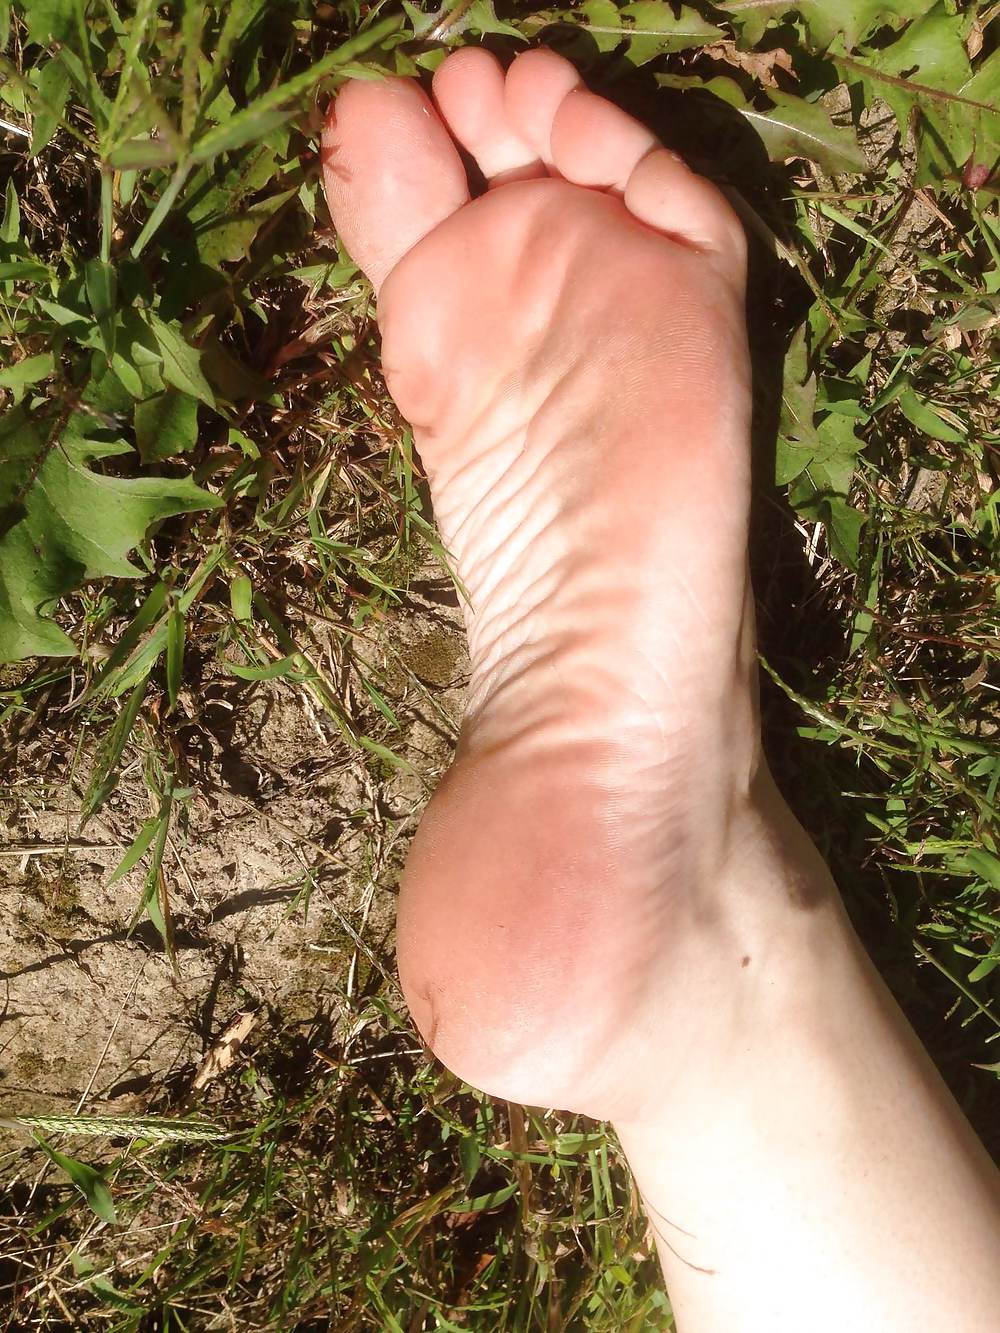 Bootys dirty smelly feet #21004439